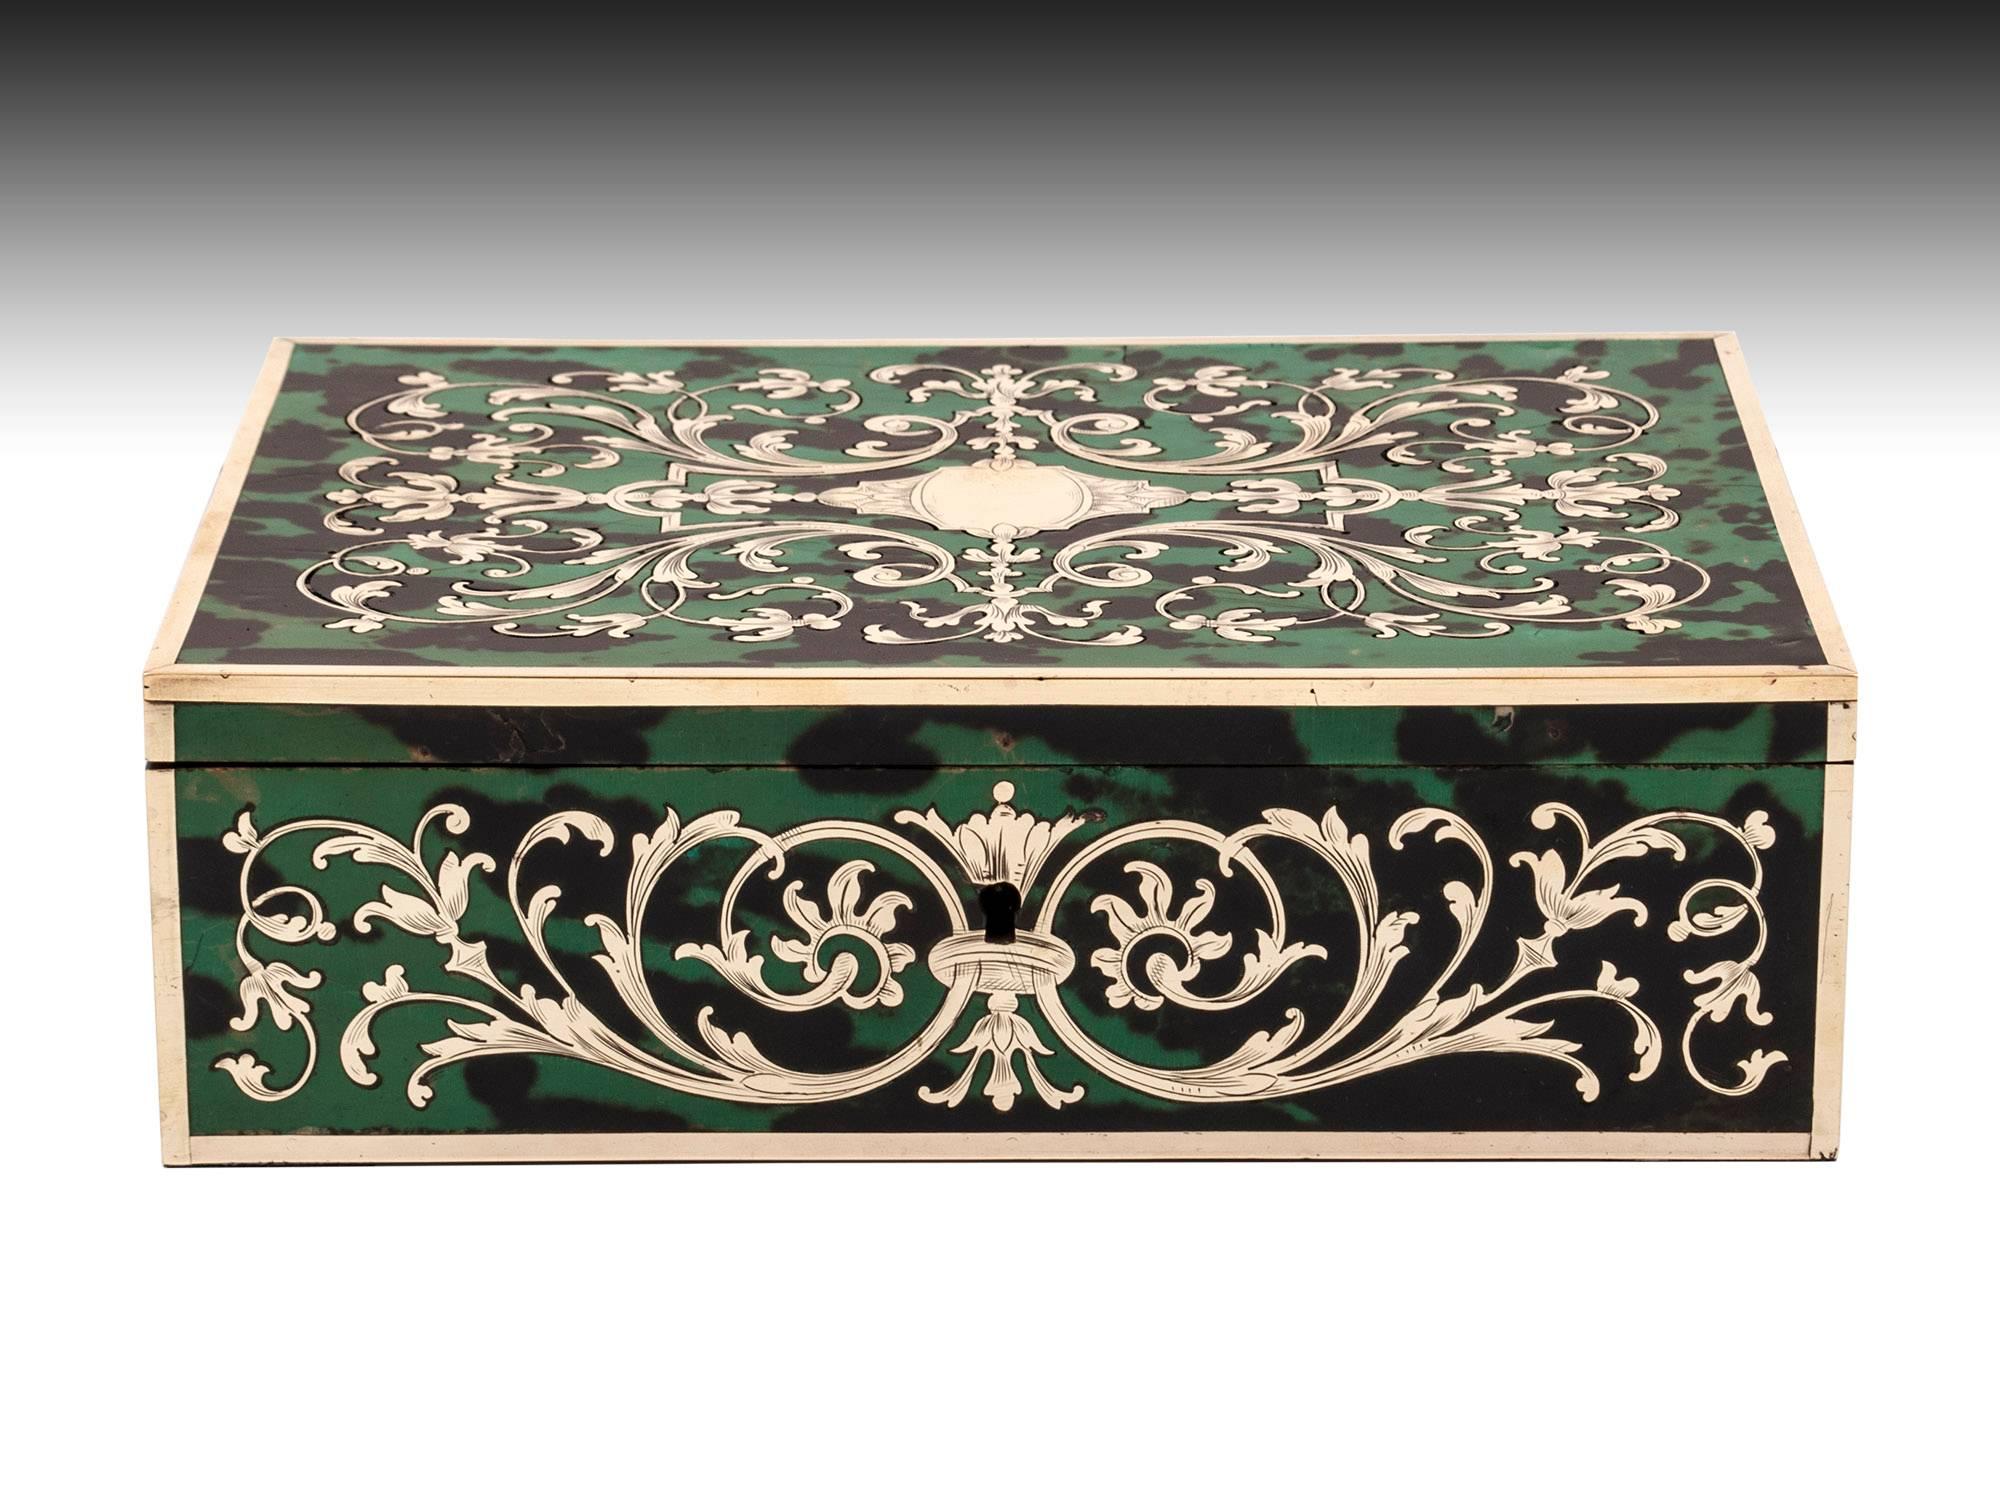 Antique Boulle jewelry Box, made of green stained tortoiseshell & engraved brass, both placed together in sheet form and hand cut into this beautiful tight mirrored design. 
The interior is lined in green silk paper and teal padded cotton velvet to